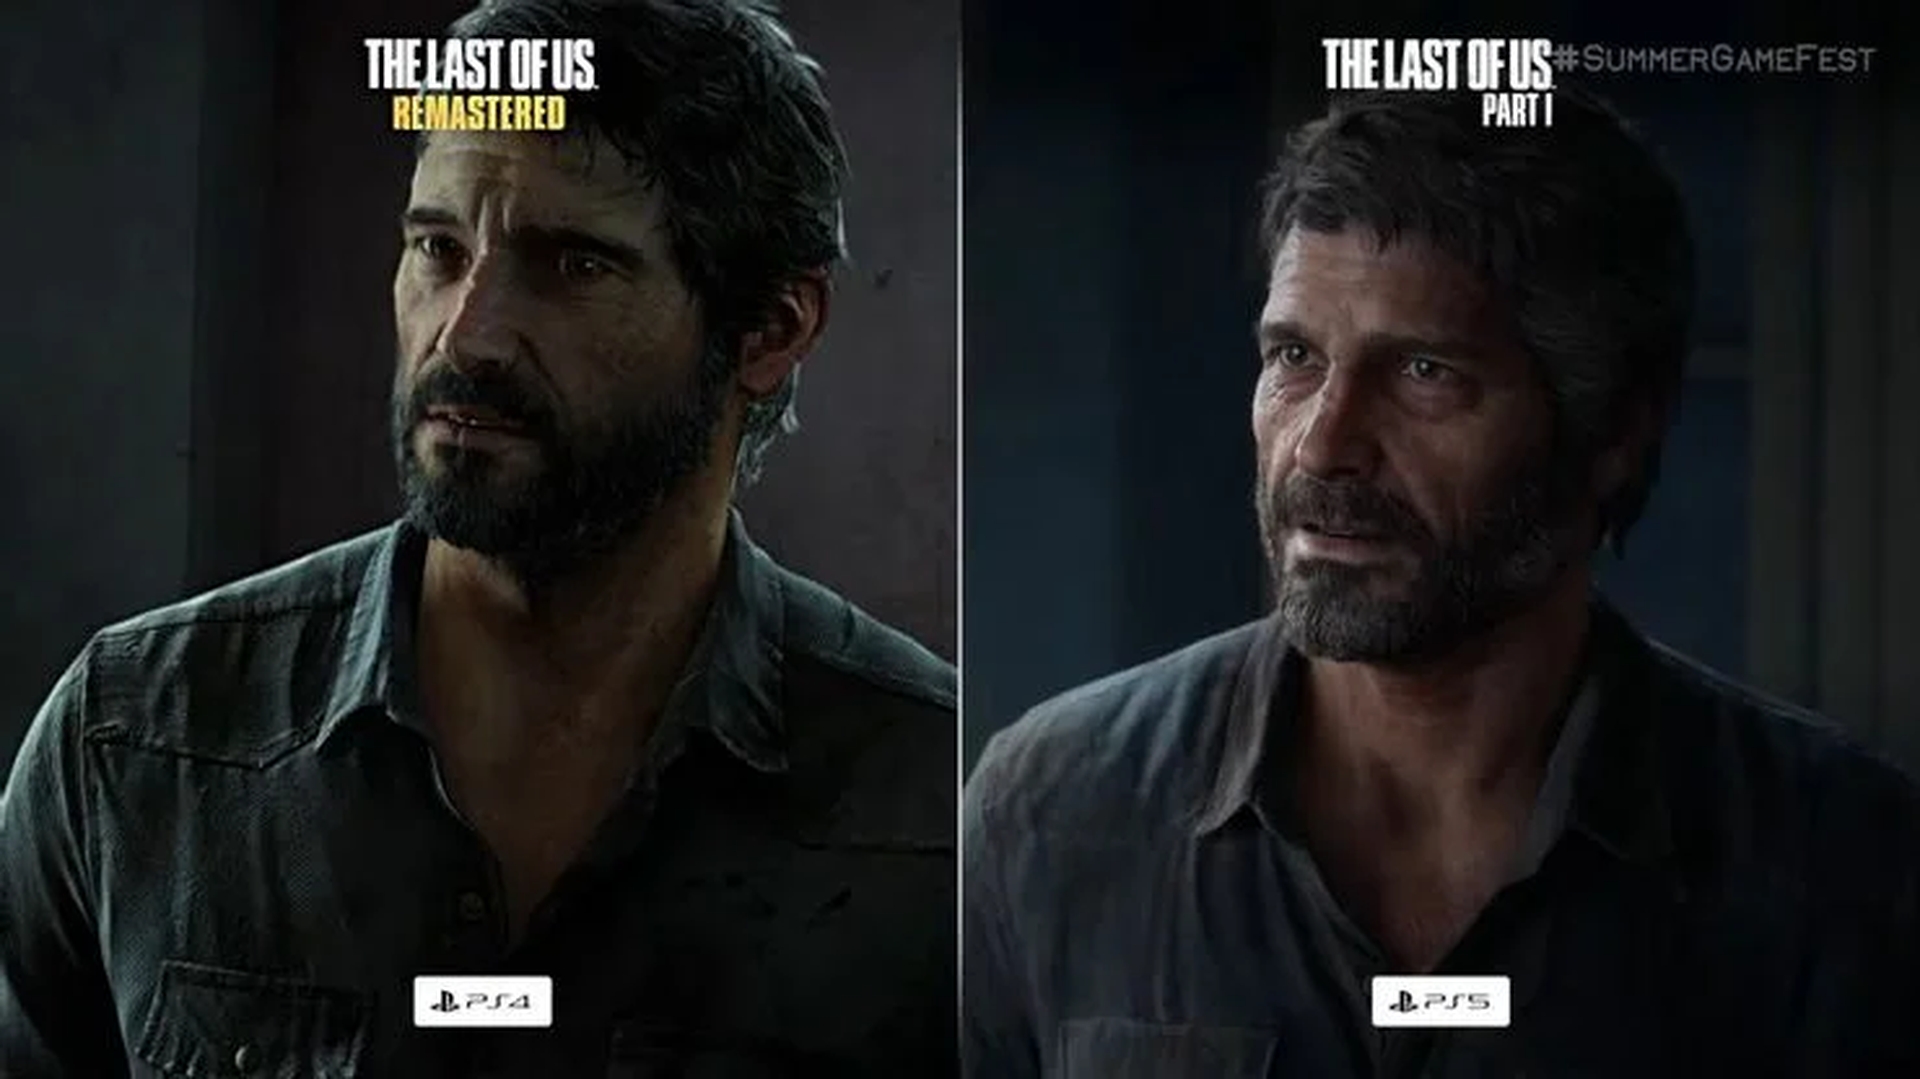 In this article, we are going to go over our The Last of Us remake comparison, including in-game images and The Last of Us Firefly Edition.